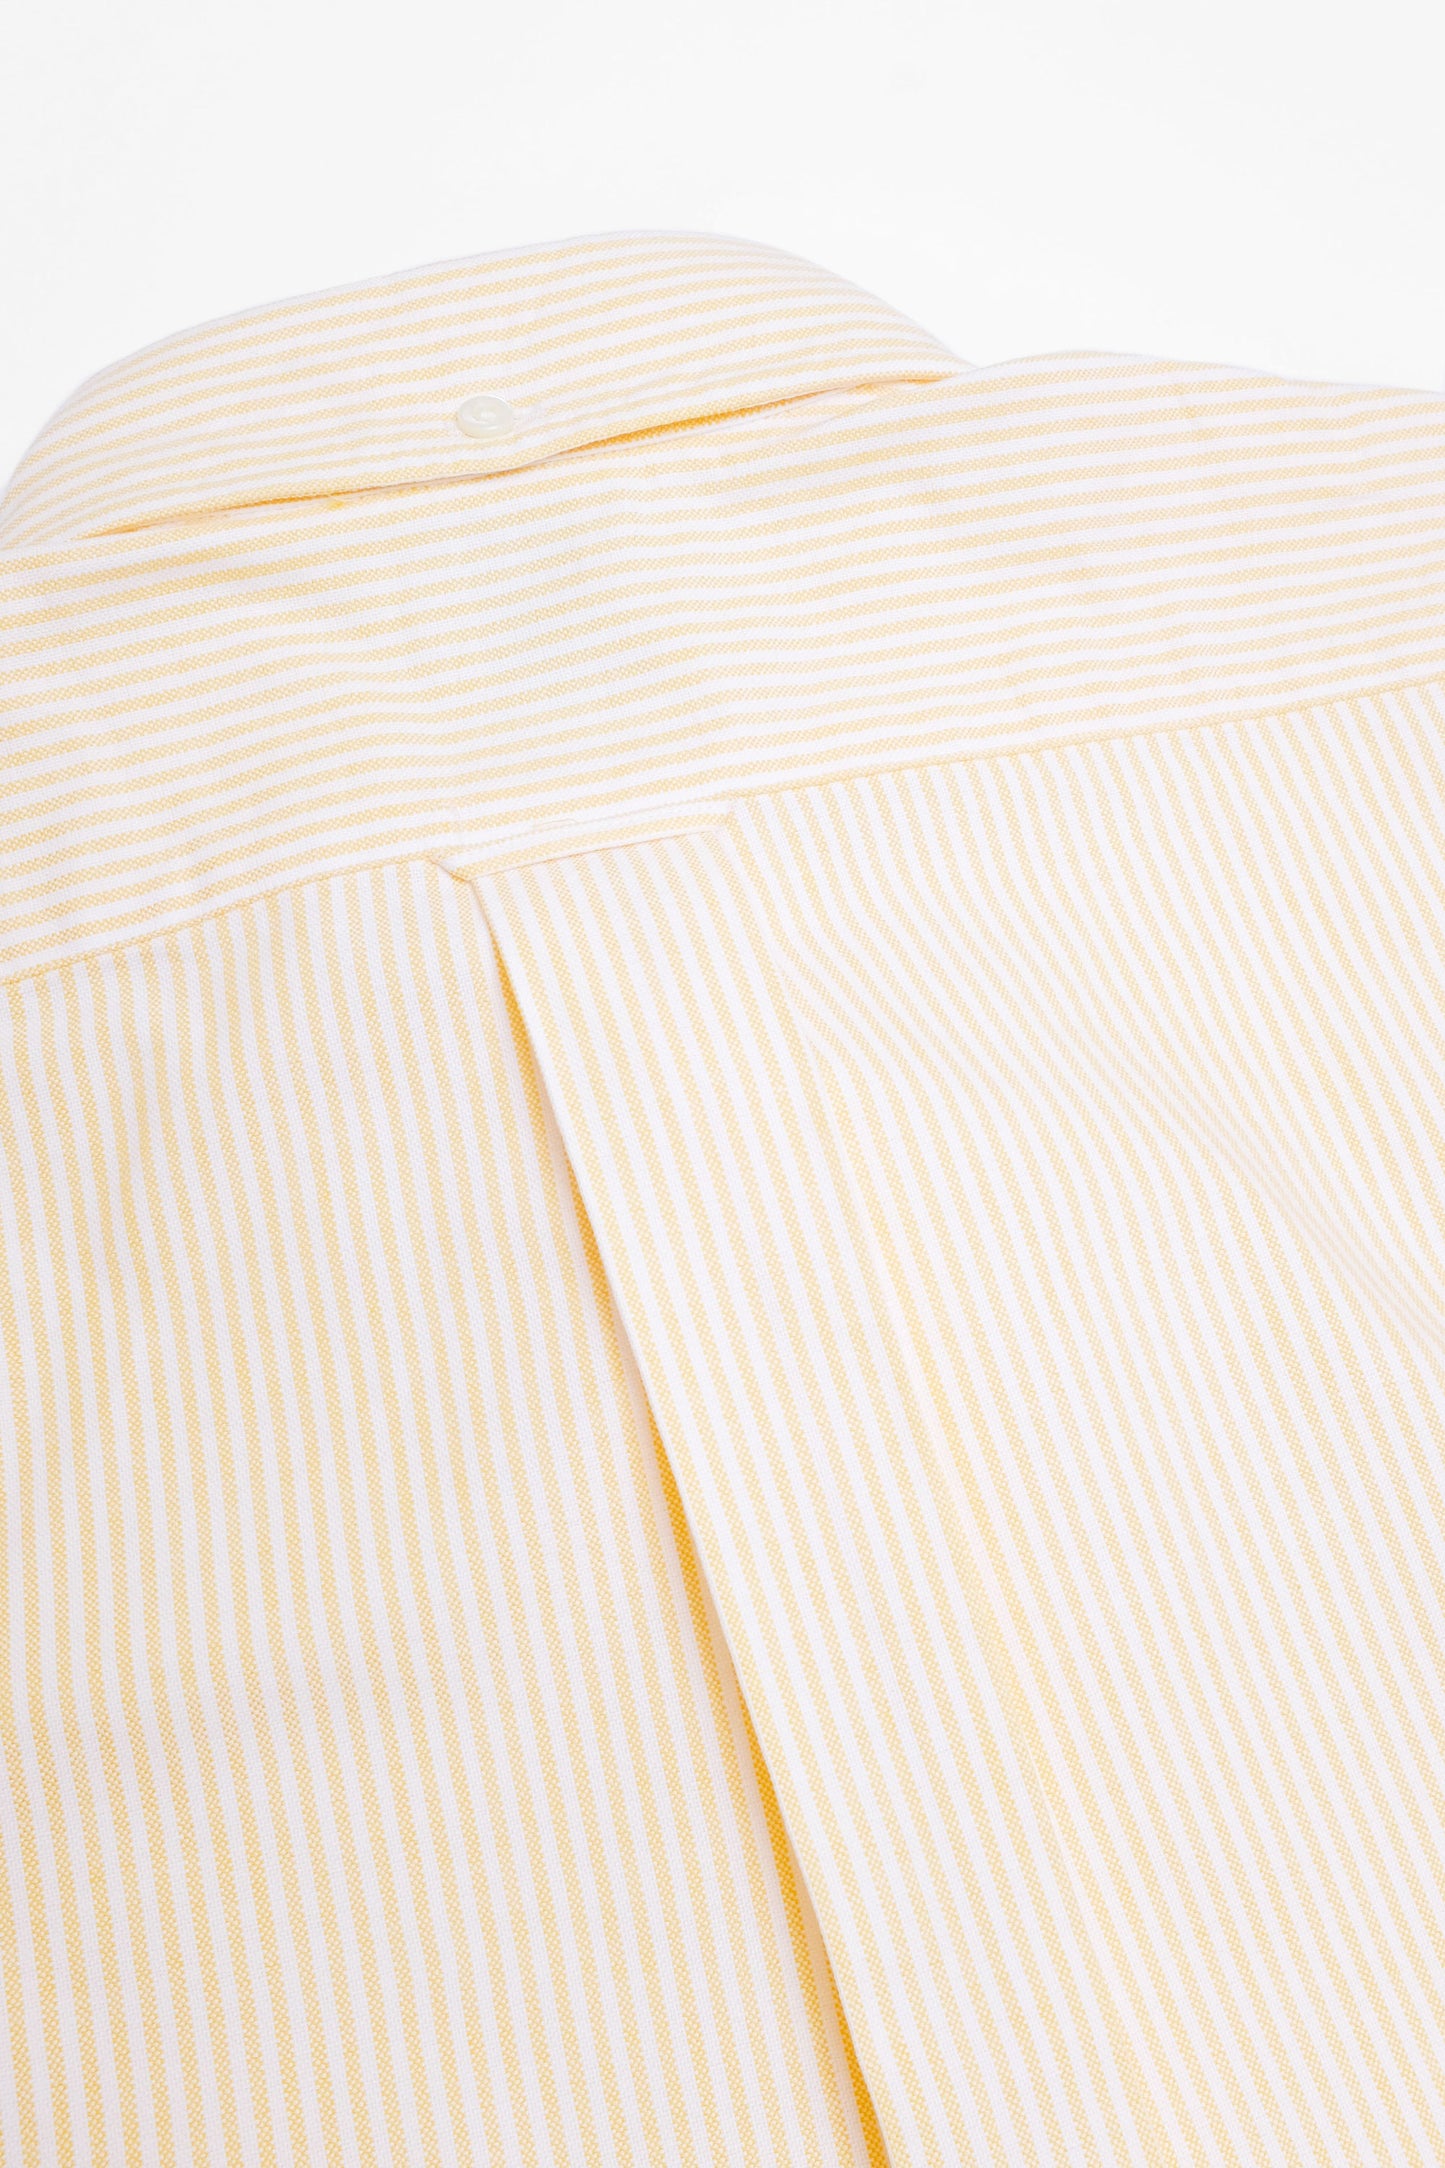 'Vintage Ivy' Shirt in yellow striped oxford